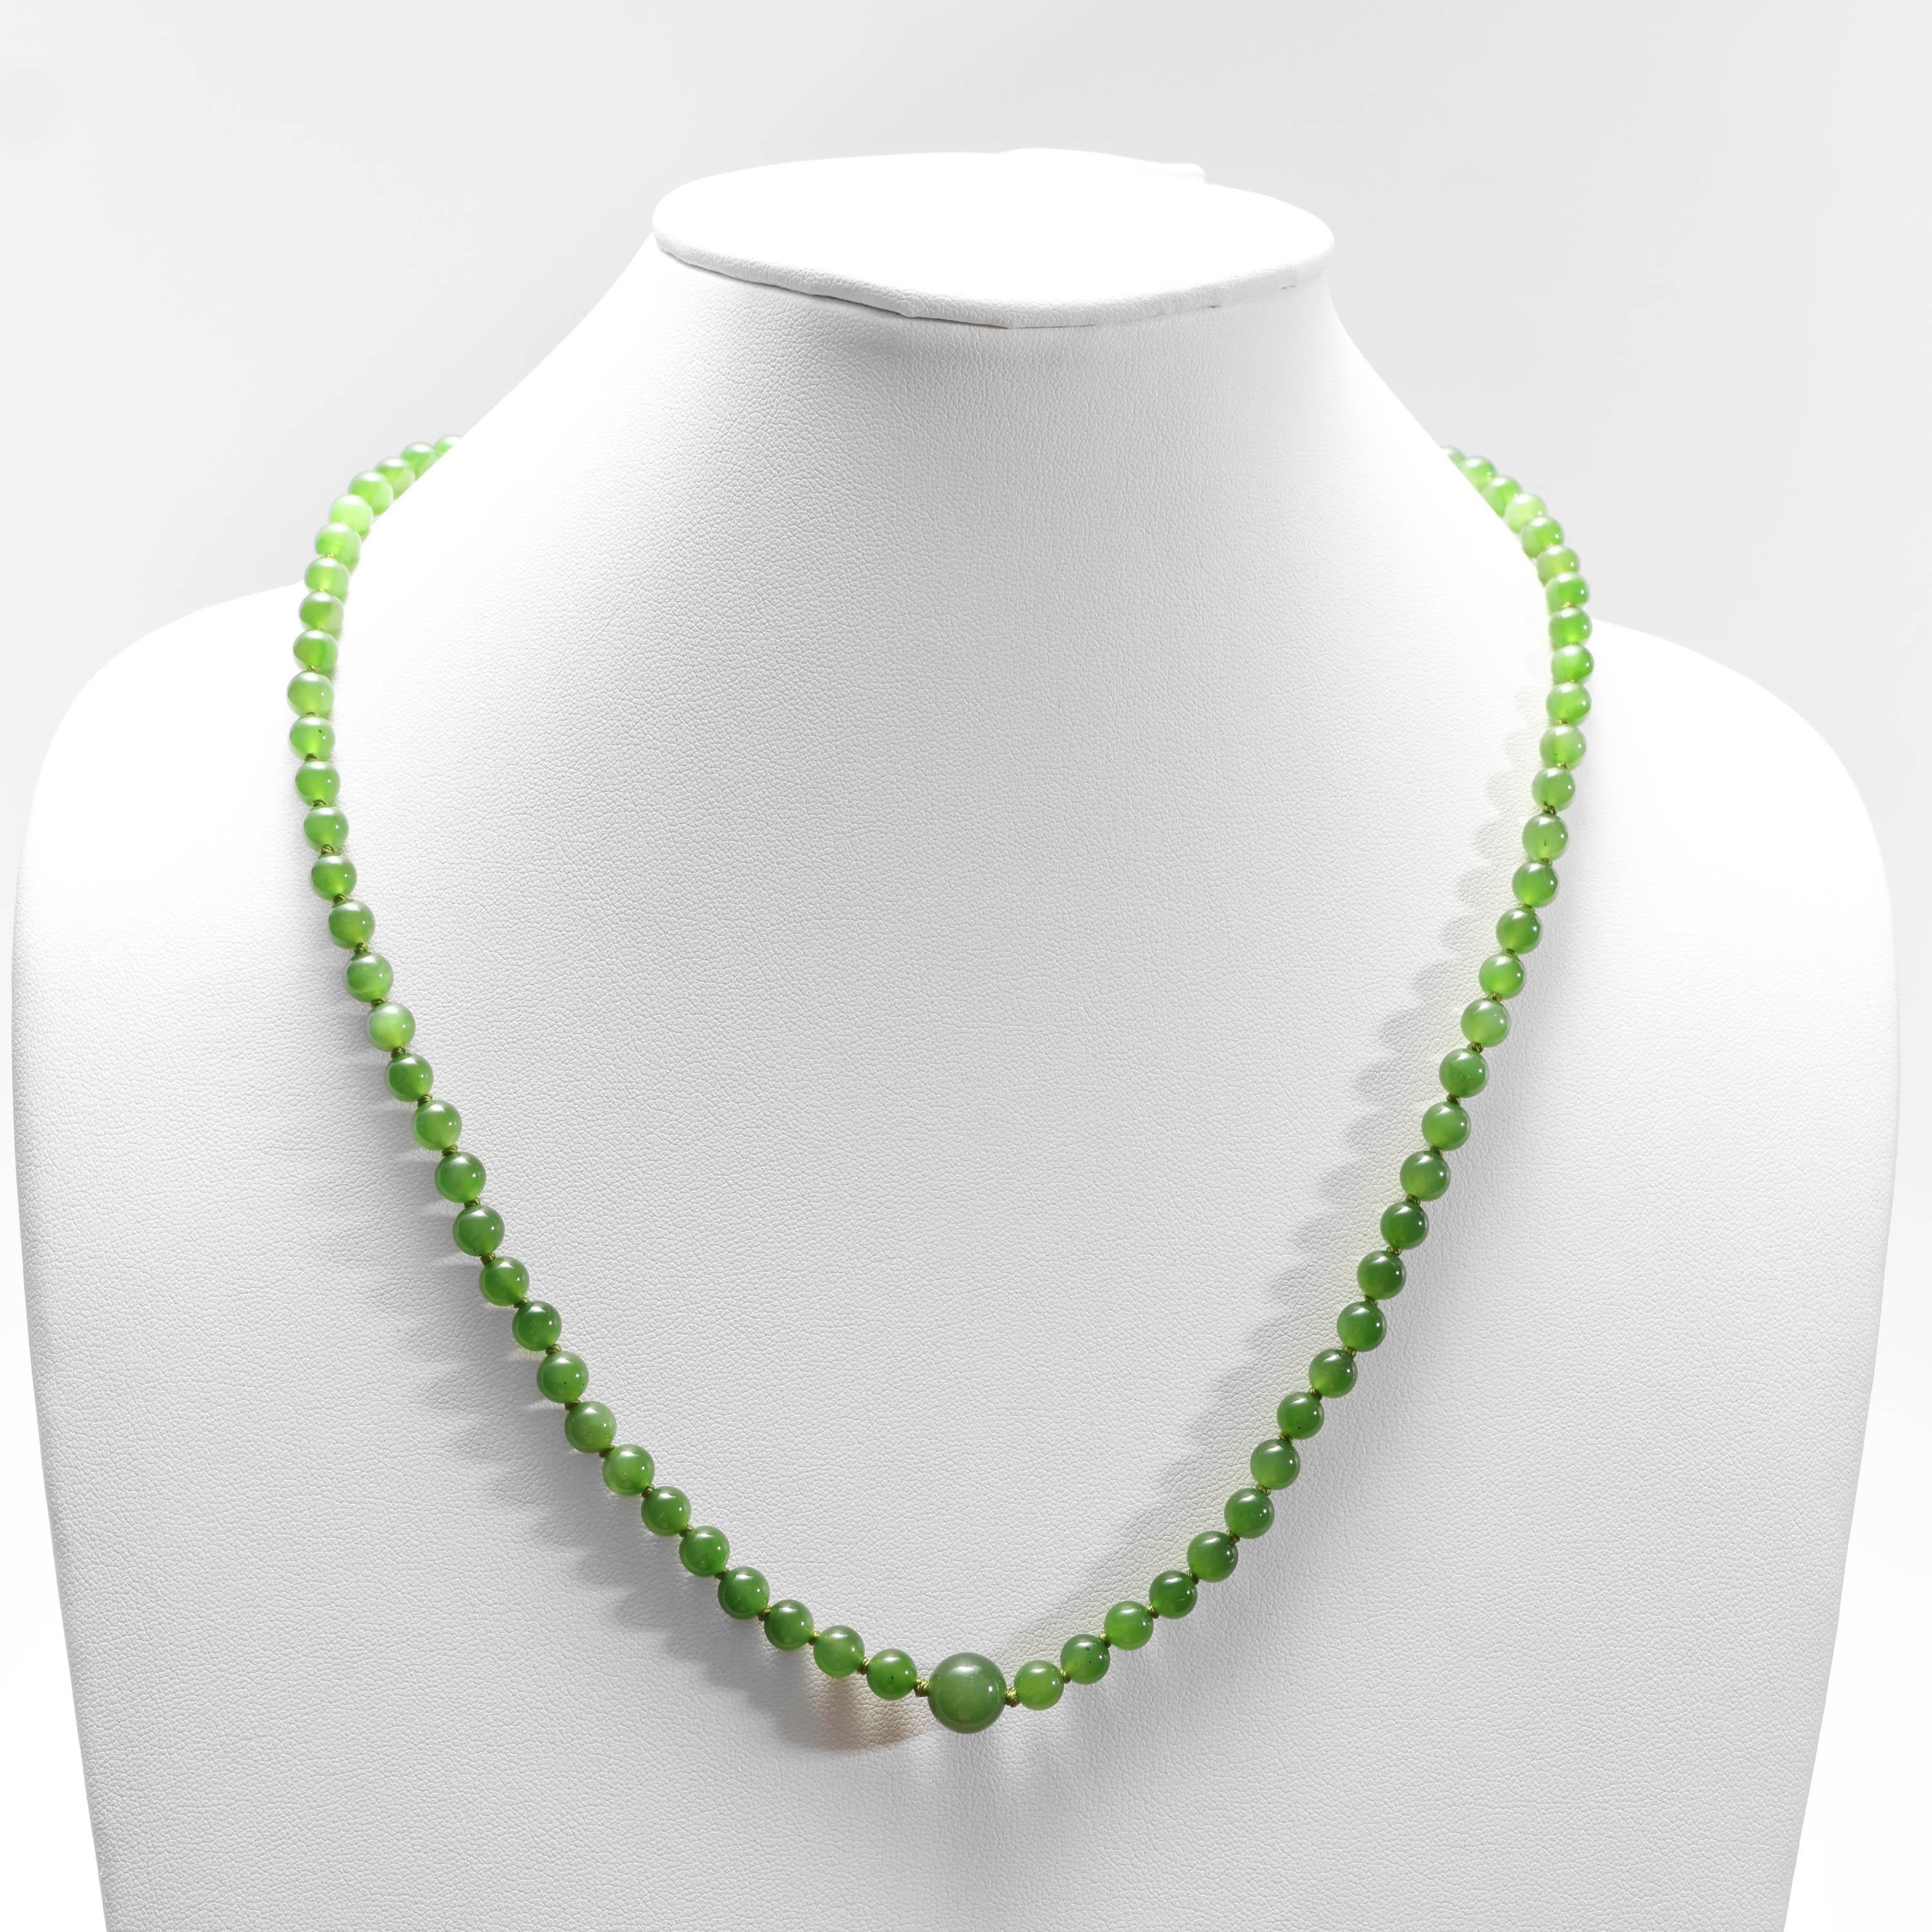 Women's or Men's Fine Nephrite Jade Necklace Hand Crafted Certified Untreated For Sale